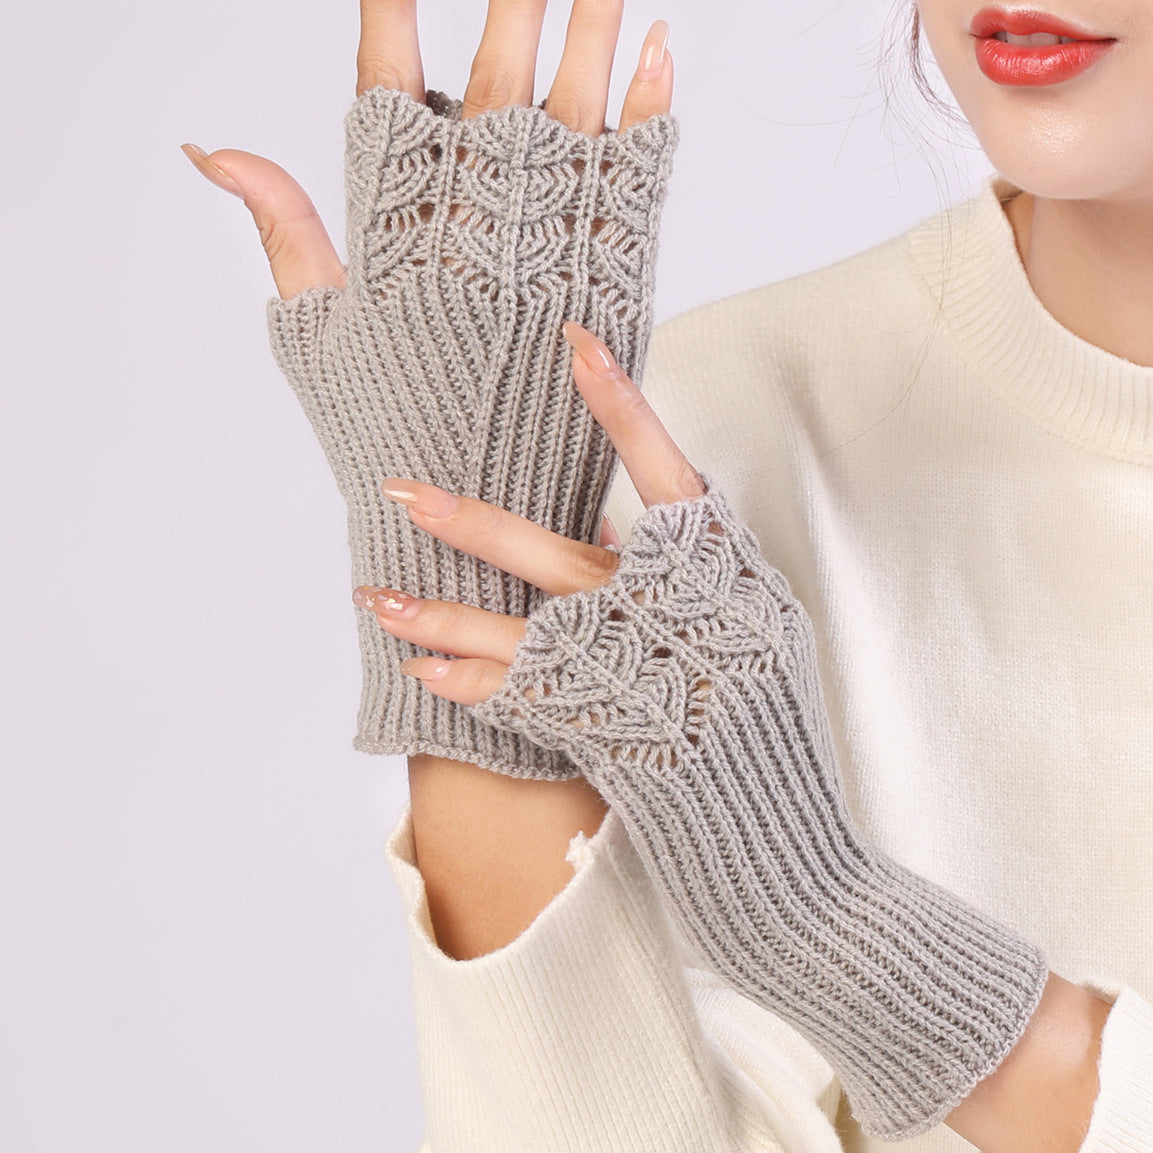 Autumn And Winter New Female Students Fashion All-match Knitted Warm Half-fingerless Gloves